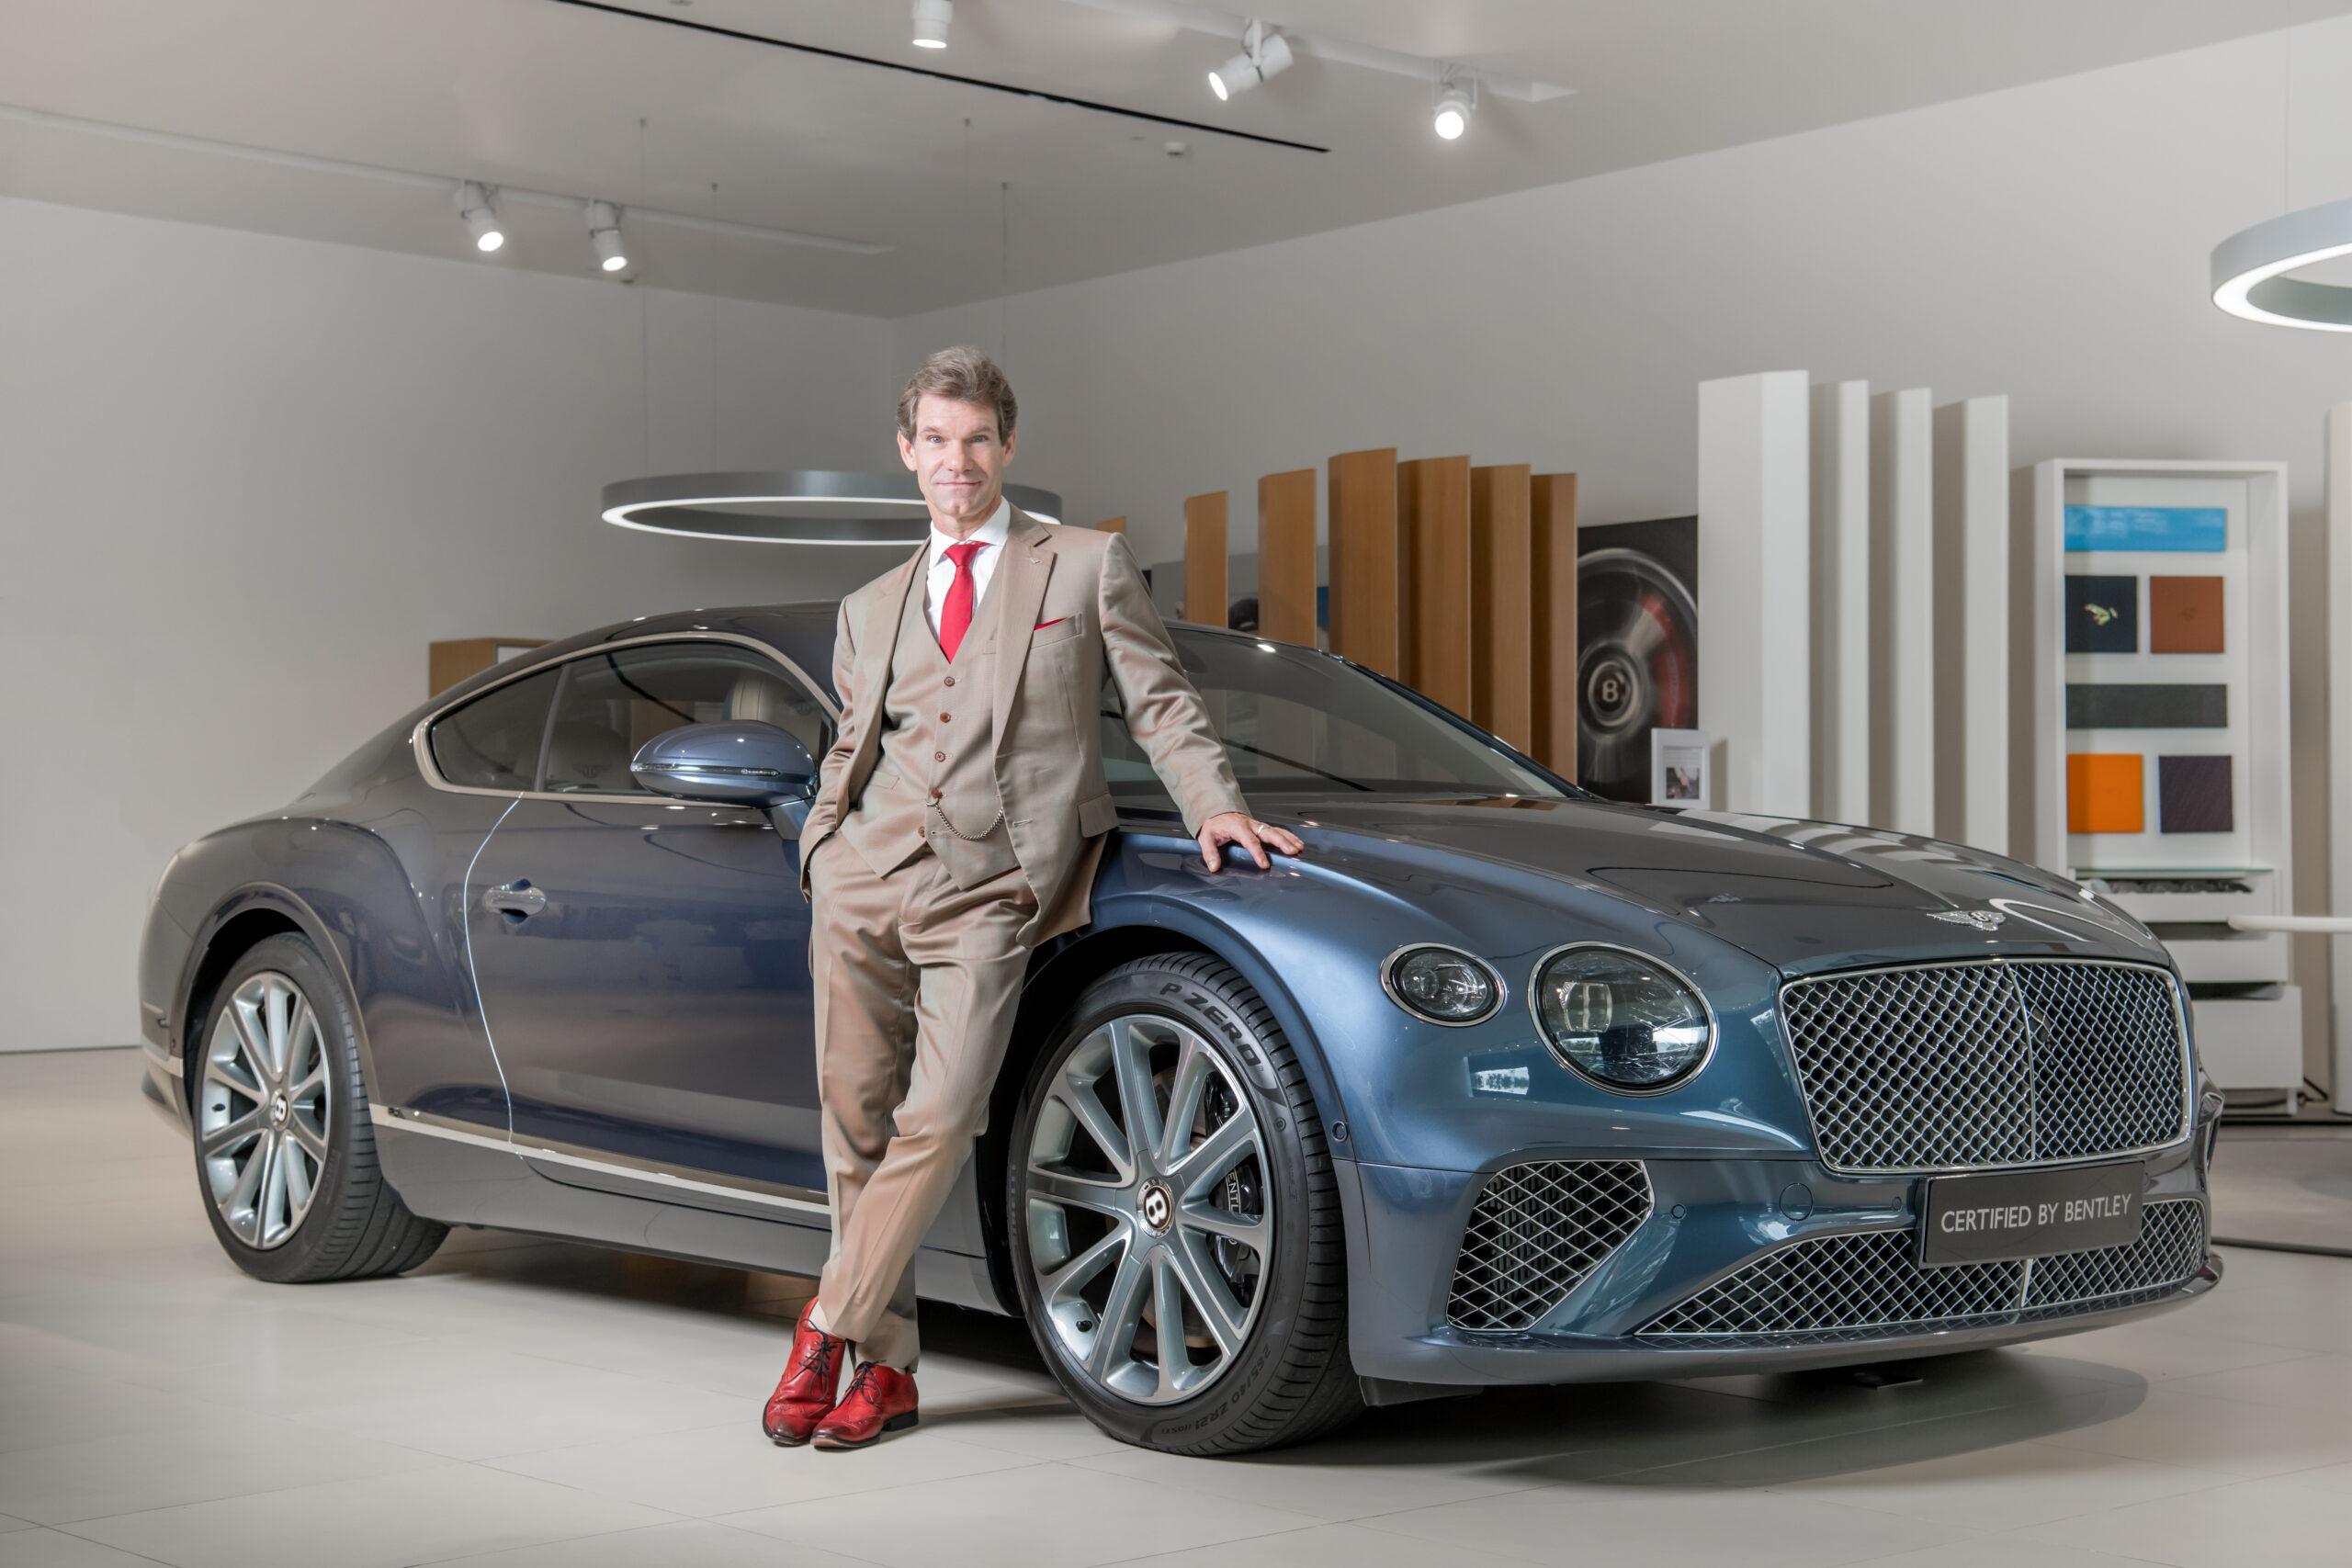 How to “Haute Couture” a Luxury Car Brand? Interview with Executive General Manager of Bentley Motors China, Hong Kong, and Macau